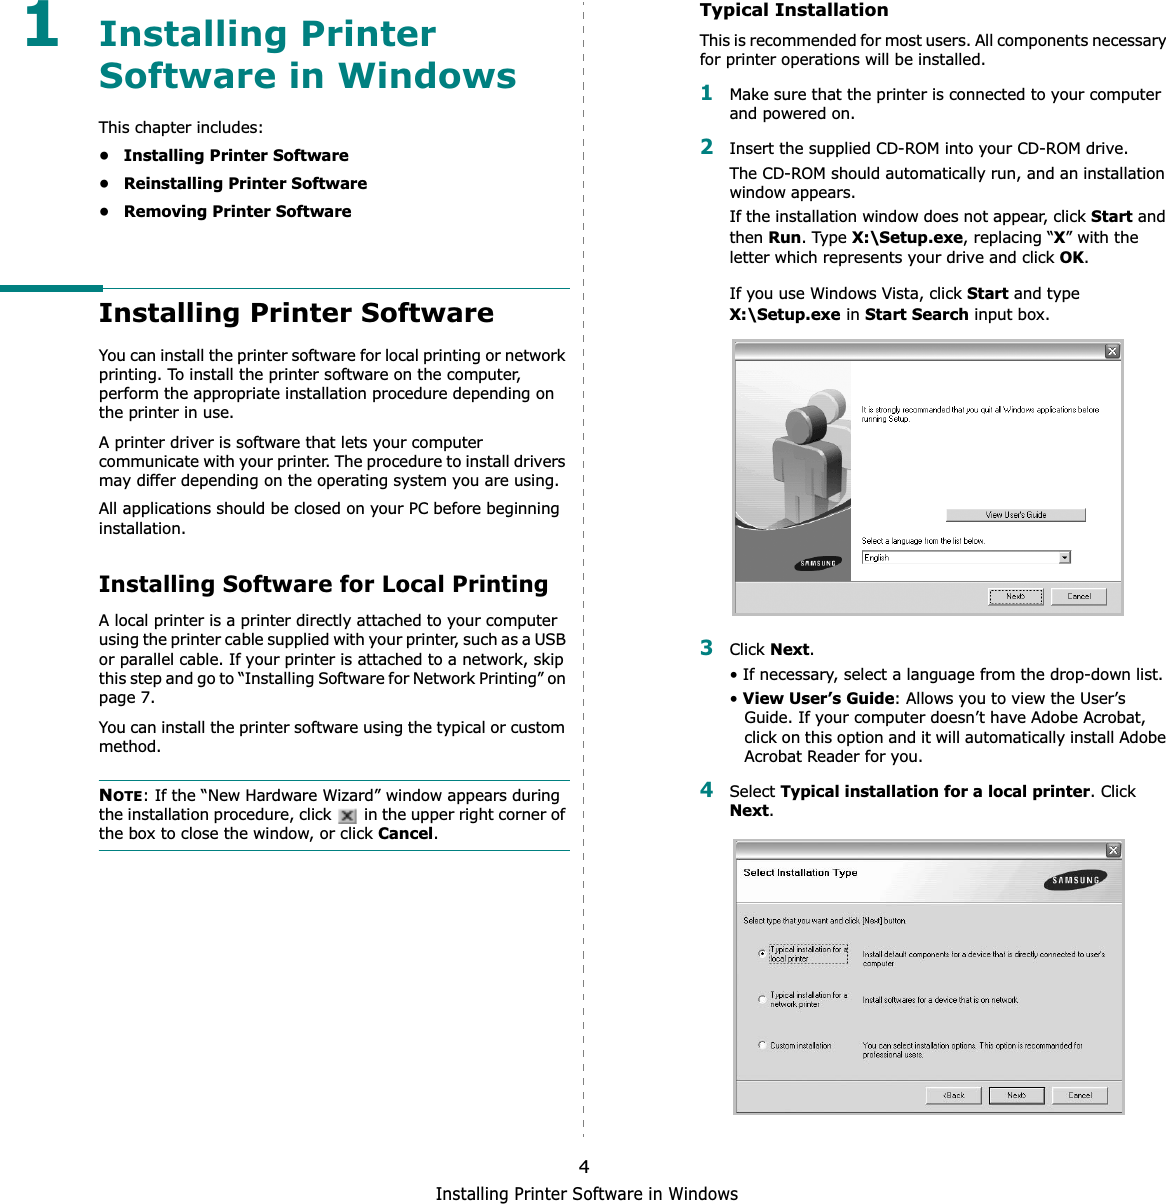 Installing Printer Software in Windows41Installing Printer Software in WindowsThis chapter includes:• Installing Printer Software• Reinstalling Printer Software• Removing Printer SoftwareInstalling Printer SoftwareYou can install the printer software for local printing or network printing. To install the printer software on the computer, perform the appropriate installation procedure depending on the printer in use.A printer driver is software that lets your computer communicate with your printer. The procedure to install drivers may differ depending on the operating system you are using.All applications should be closed on your PC before beginning installation. Installing Software for Local PrintingA local printer is a printer directly attached to your computer using the printer cable supplied with your printer, such as a USB or parallel cable. If your printer is attached to a network, skip this step and go to “Installing Software for Network Printing” on page 7.You can install the printer software using the typical or custom method.NOTE: If the “New Hardware Wizard” window appears during the installation procedure, click   in the upper right corner of the box to close the window, or click Cancel.Typical InstallationThis is recommended for most users. All components necessary for printer operations will be installed.1Make sure that the printer is connected to your computer and powered on.2Insert the supplied CD-ROM into your CD-ROM drive.The CD-ROM should automatically run, and an installation window appears.If the installation window does not appear, click Start and then Run. Type X:\Setup.exe, replacing “X” with the letter which represents your drive and click OK.If you use Windows Vista, click Start and type X:\Setup.exeinStart Search input box. 3Click Next.• If necessary, select a language from the drop-down list.•View User’s Guide: Allows you to view the User’s Guide. If your computer doesn’t have Adobe Acrobat, click on this option and it will automatically install Adobe Acrobat Reader for you.4Select Typical installation for a local printer. Click Next.